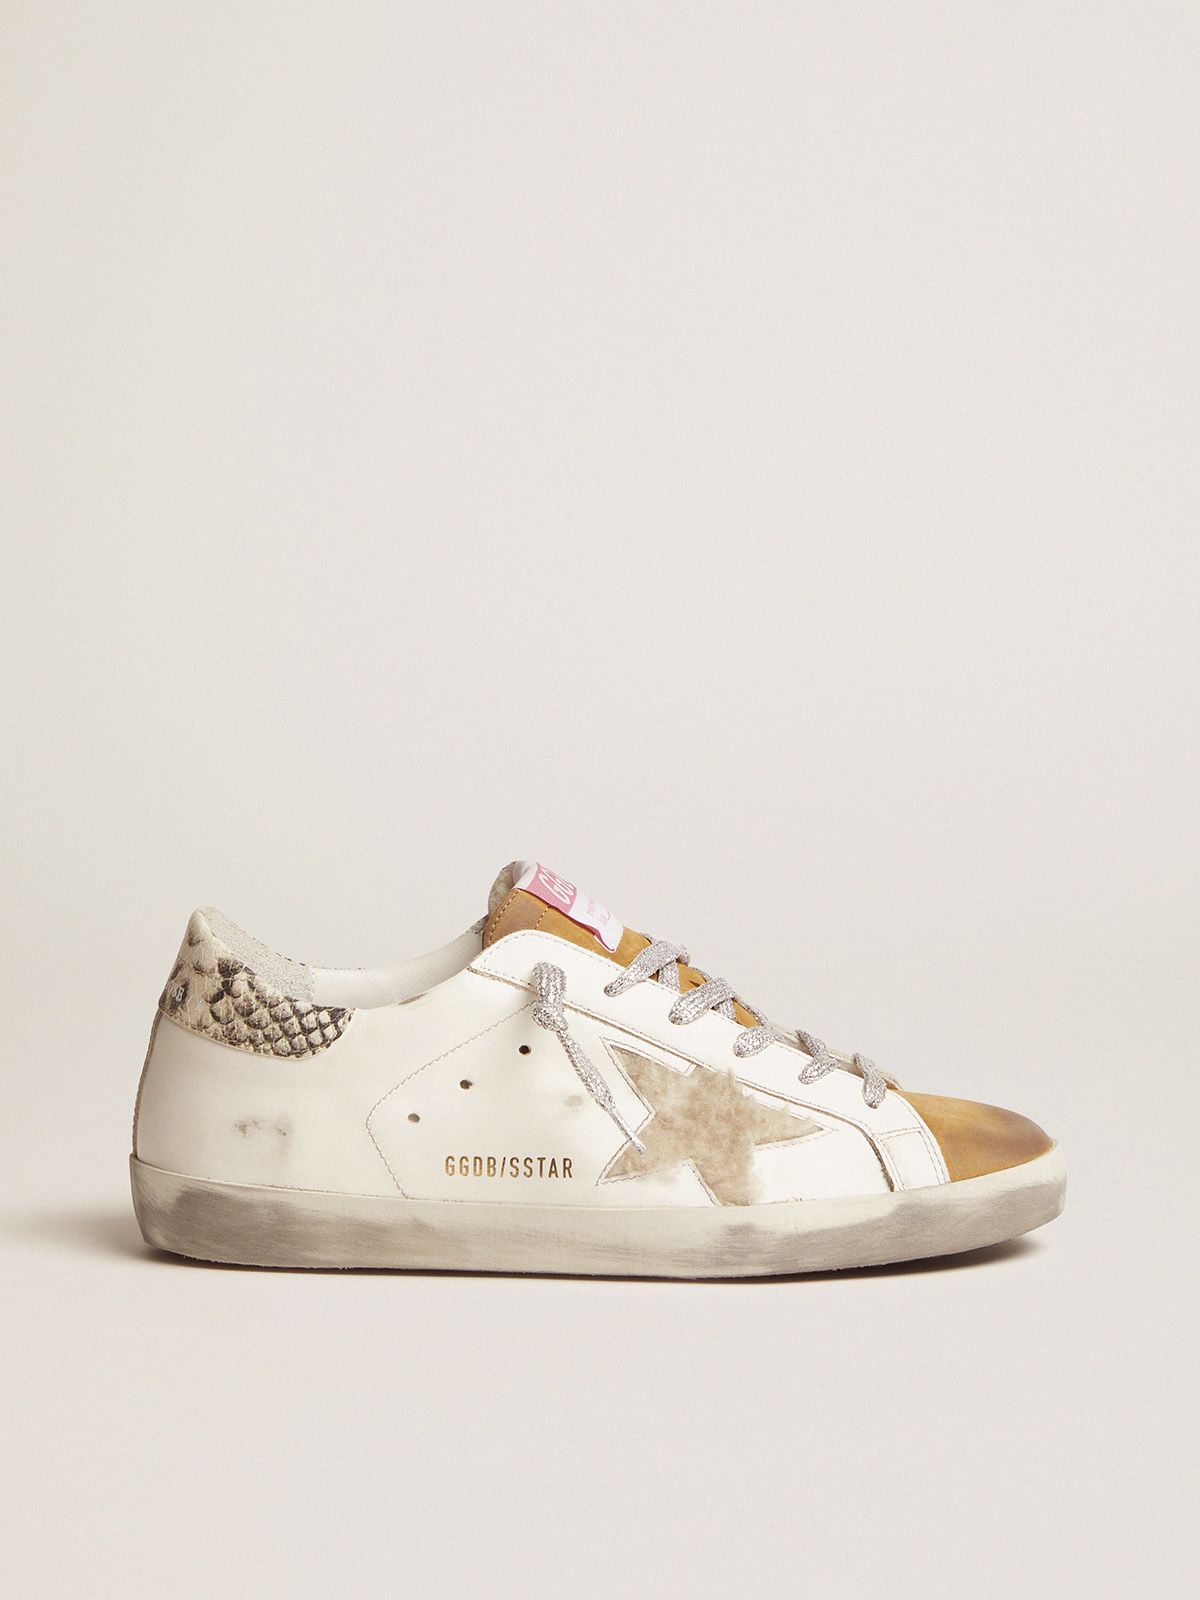 golden goose sneakers shearling snake-print made heel Super-Star from tab with